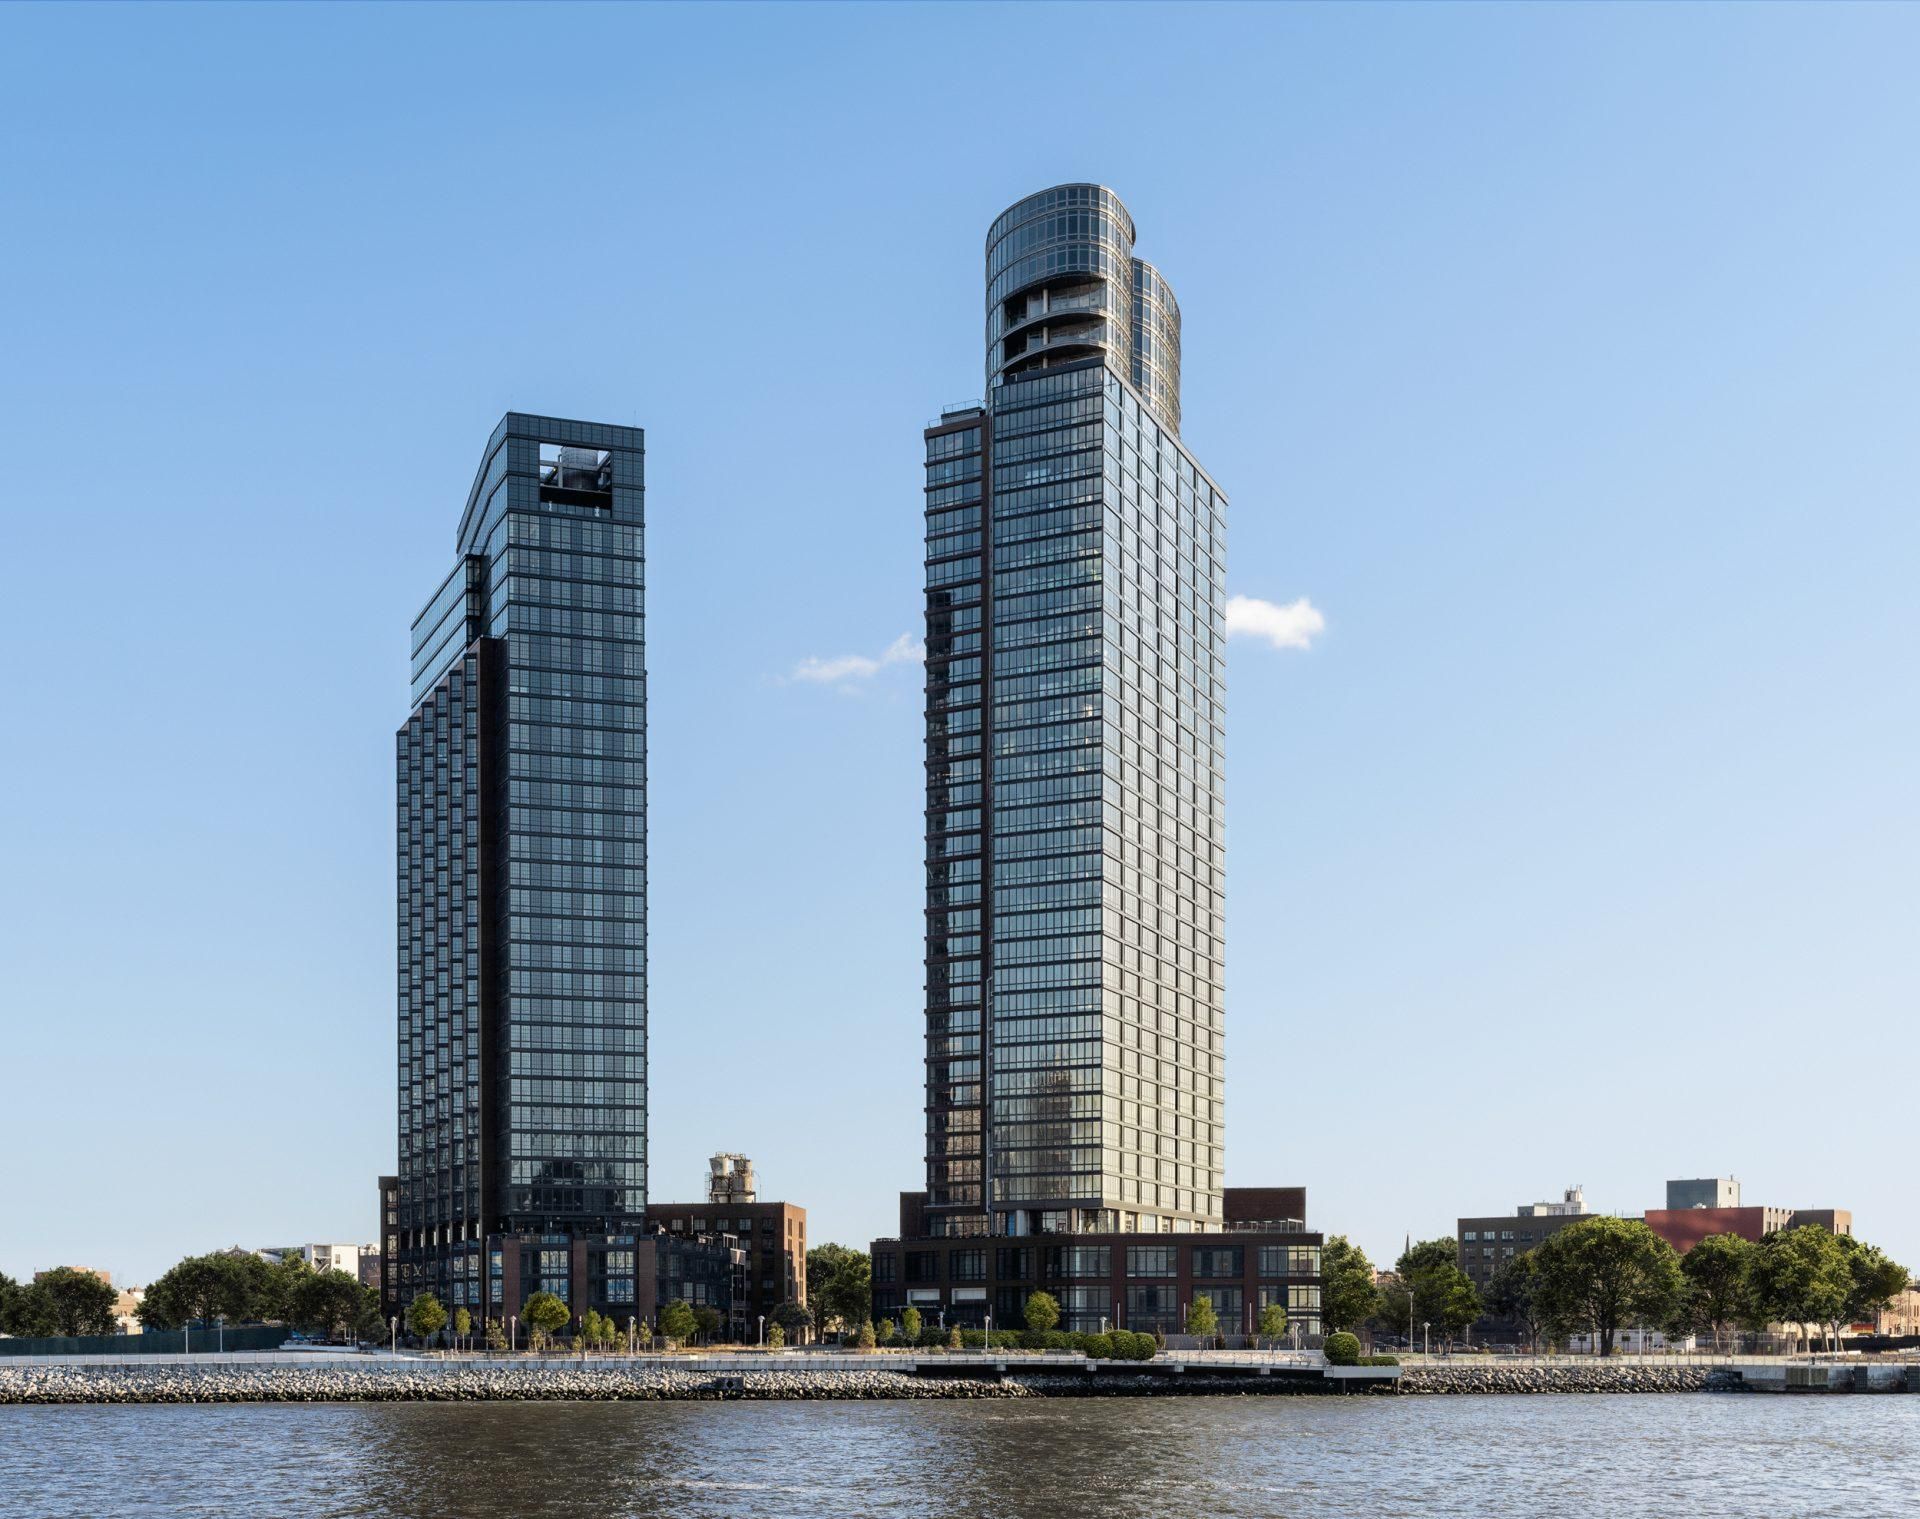 Second Apartment Tower Opens at Greenpoint Landing